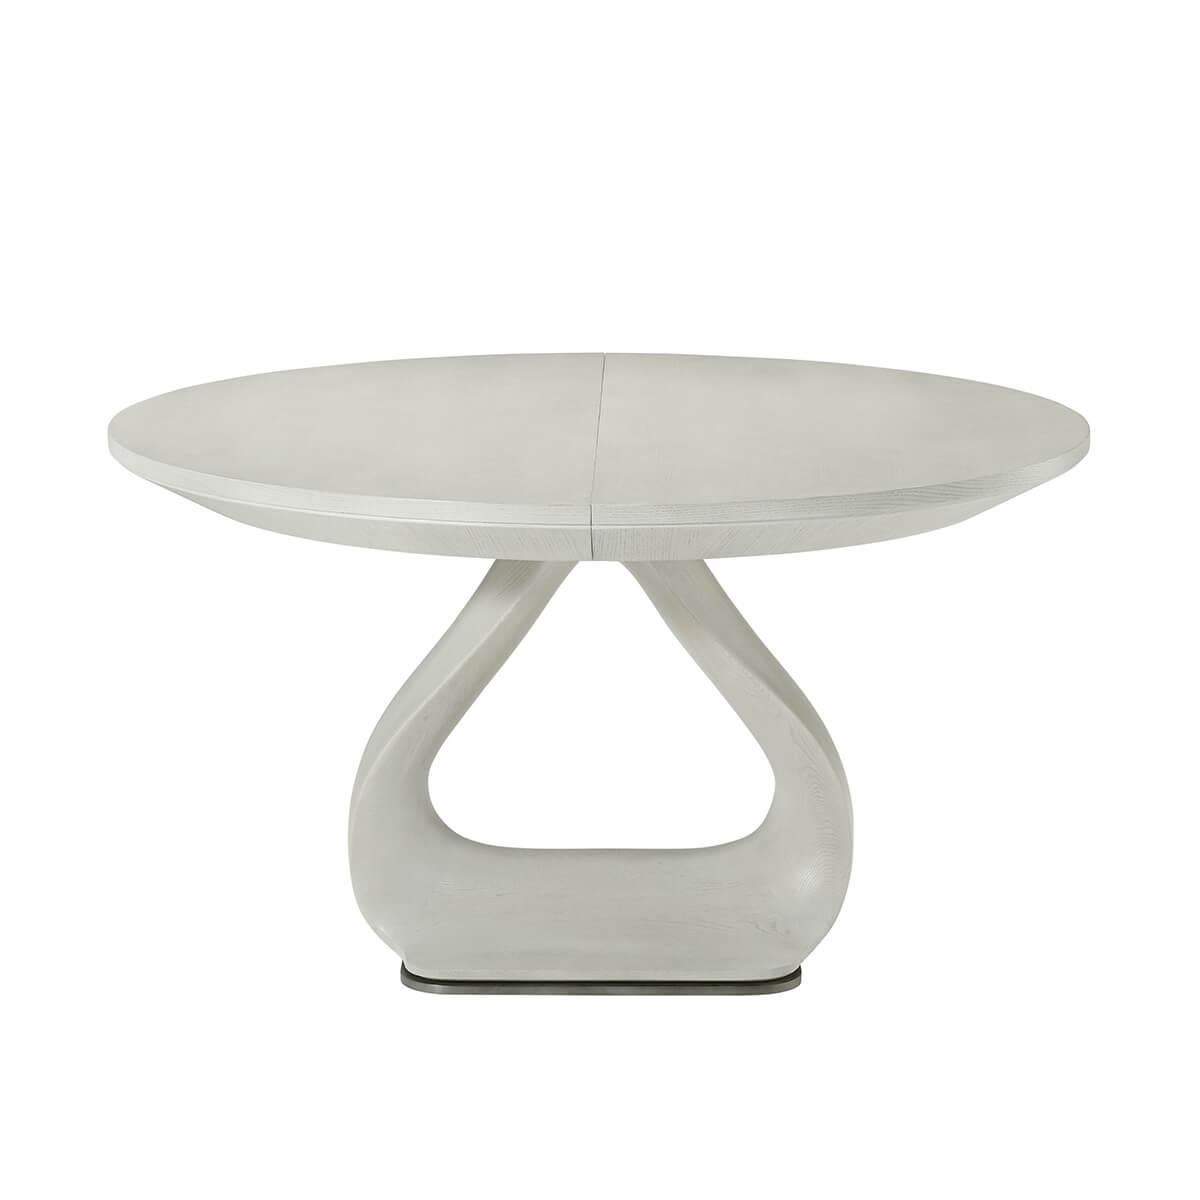 Contemporary Organic Modern White Round Extending Dining Table For Sale